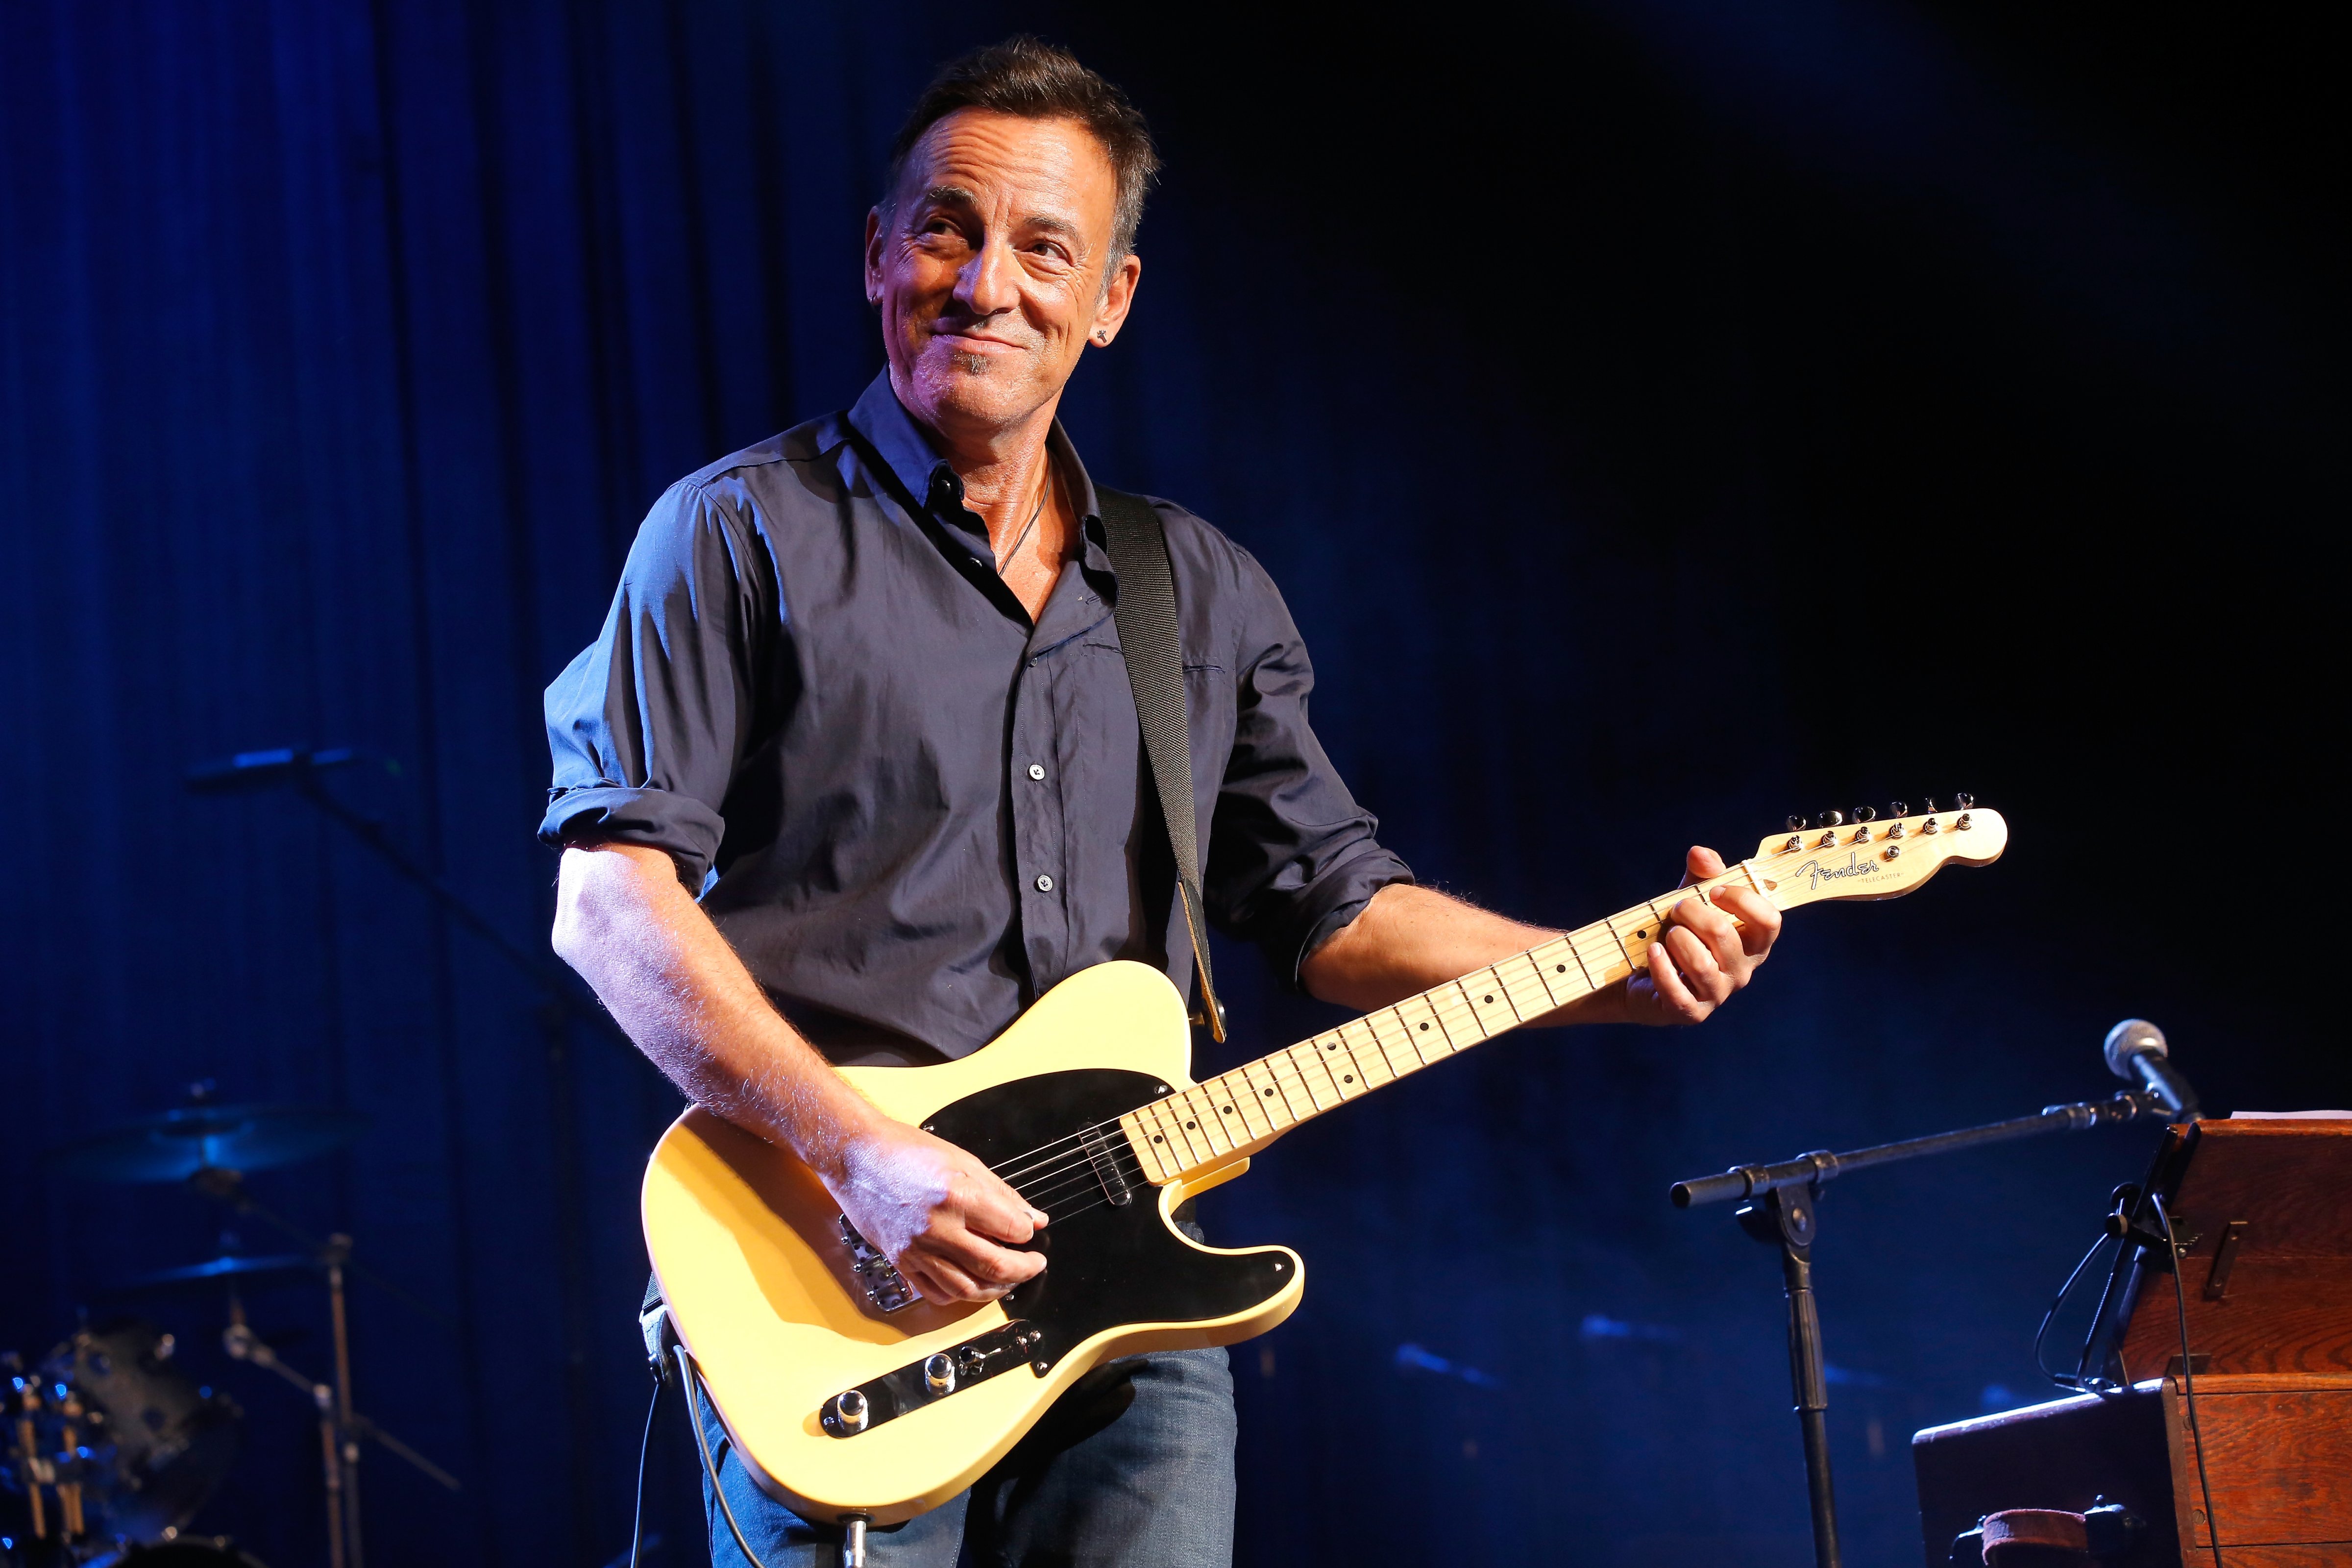 Bruce Springsteen performs at the 7th annual "Stand Up For Heroes" event at Madison Square Garden on November 6, 2013 in New York City. (Jemal Countess—Getty Images)